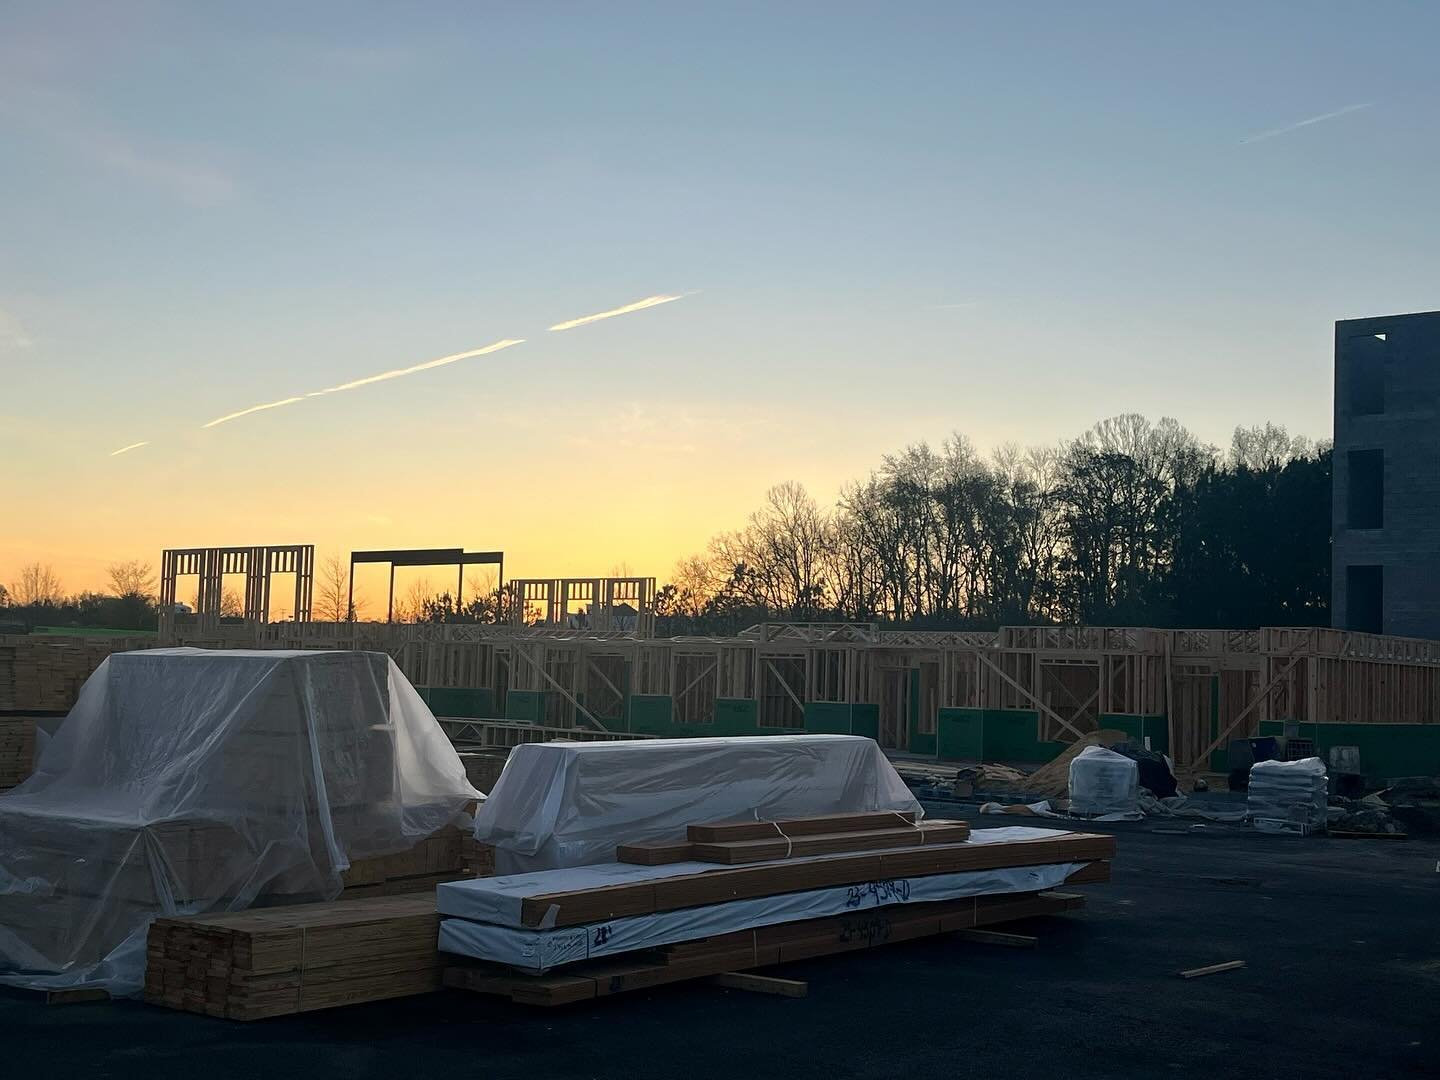 Our team is loving early mornings in Chesterfield at our project Ashlake Trails and Crossing! Check out these views and progress shots 🌄

#rva #affordablehousing #chesterfield #construction #mornings #views